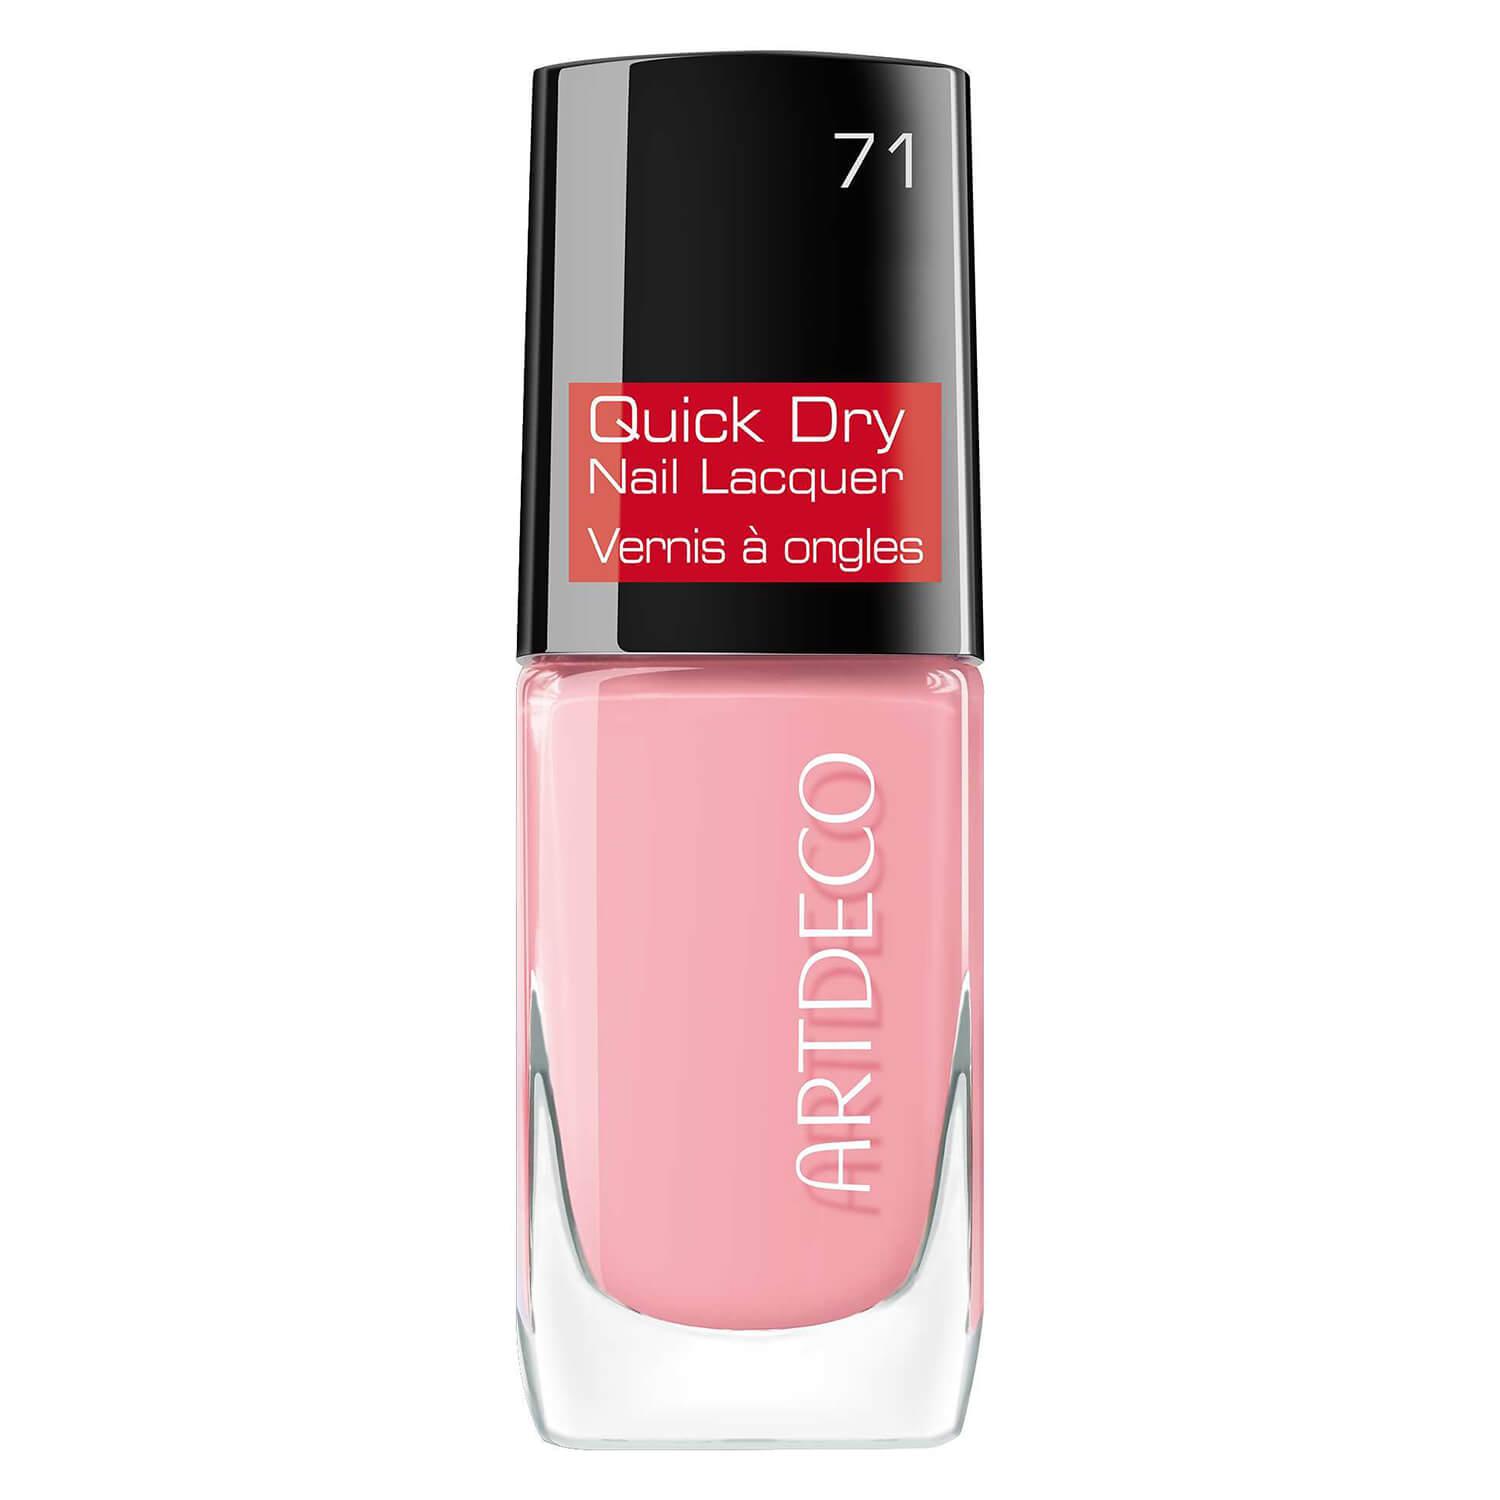 Quick Dry Nail Lacquer Cosy Rosy 71